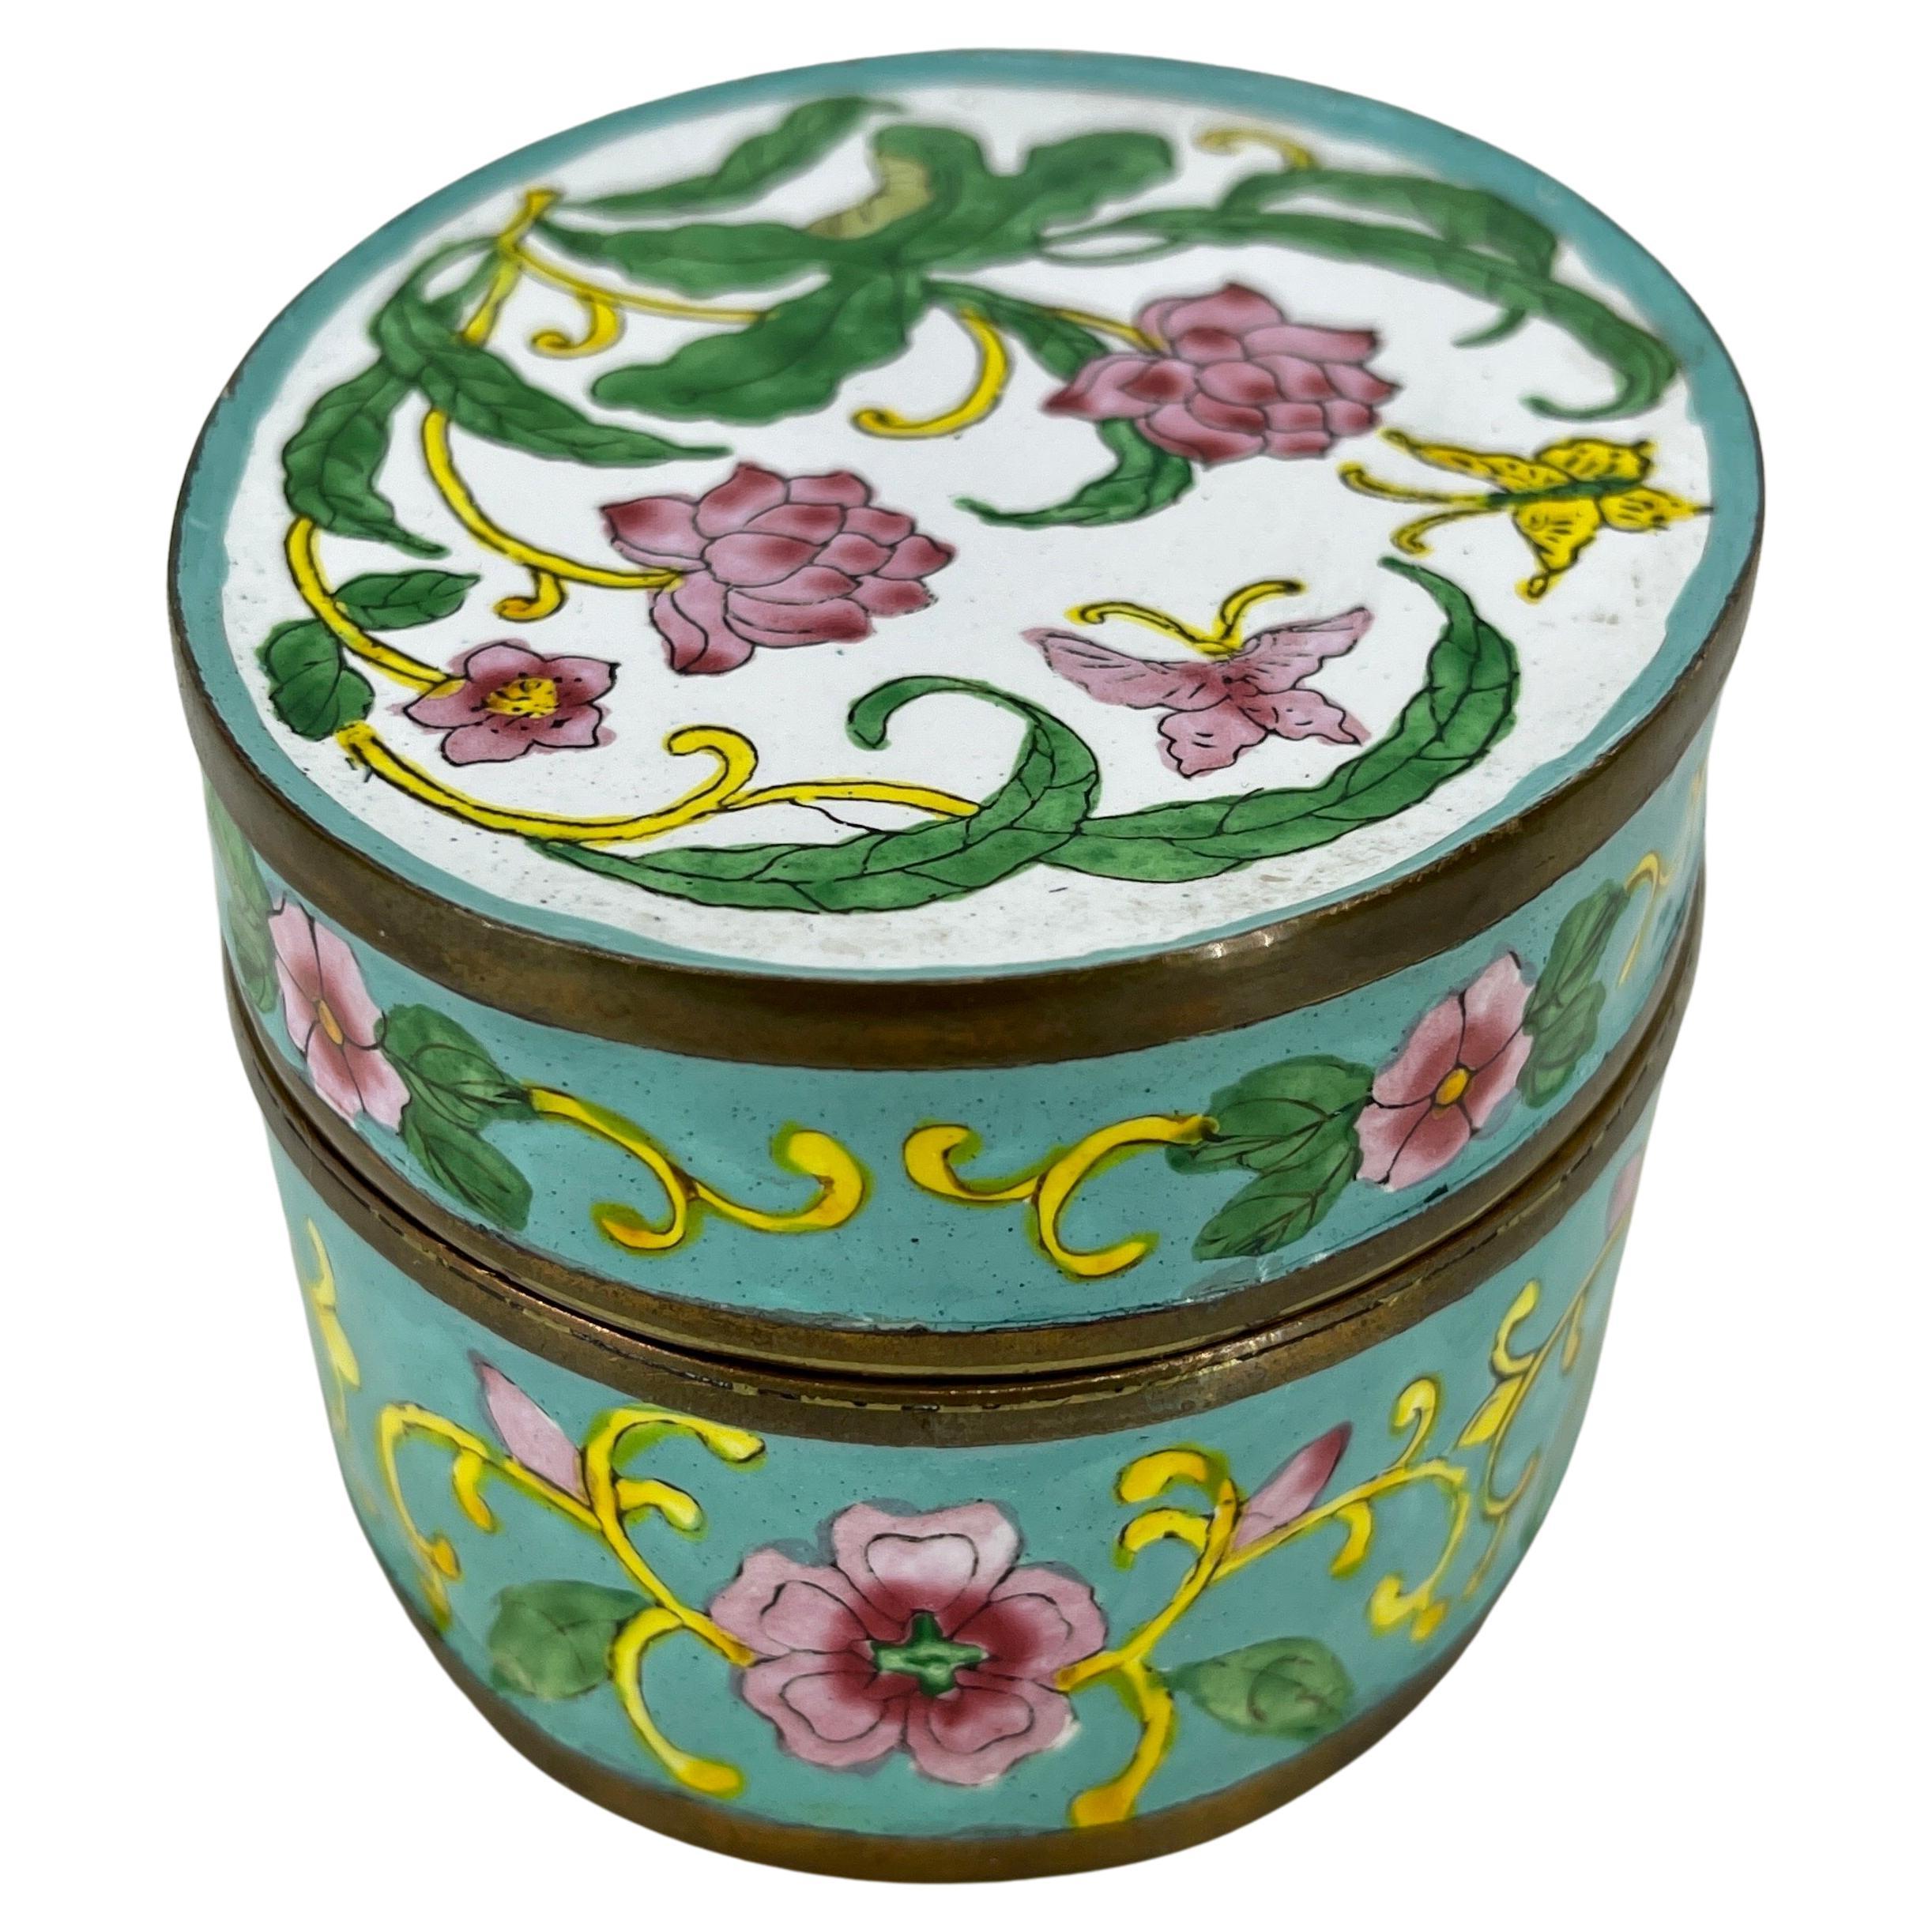 Chinese Oval Flower Decorated Cloisonné Enamel Jewelry Box, China, 1920's